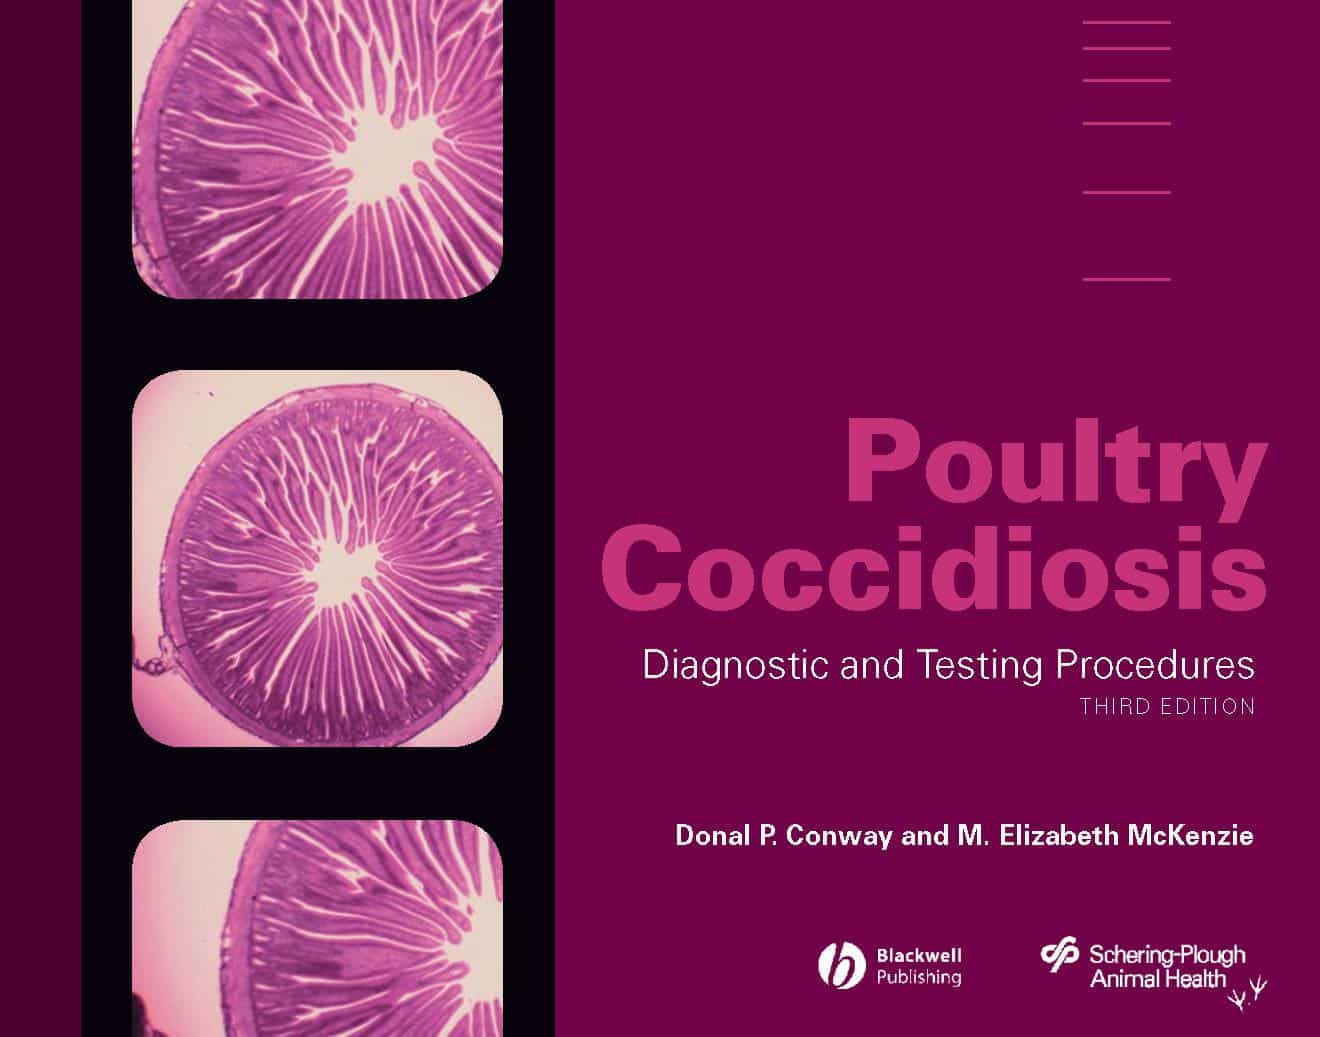 Poultry Coccidiosis Diagnostic And Testing Procedures 3rd Edition PDF